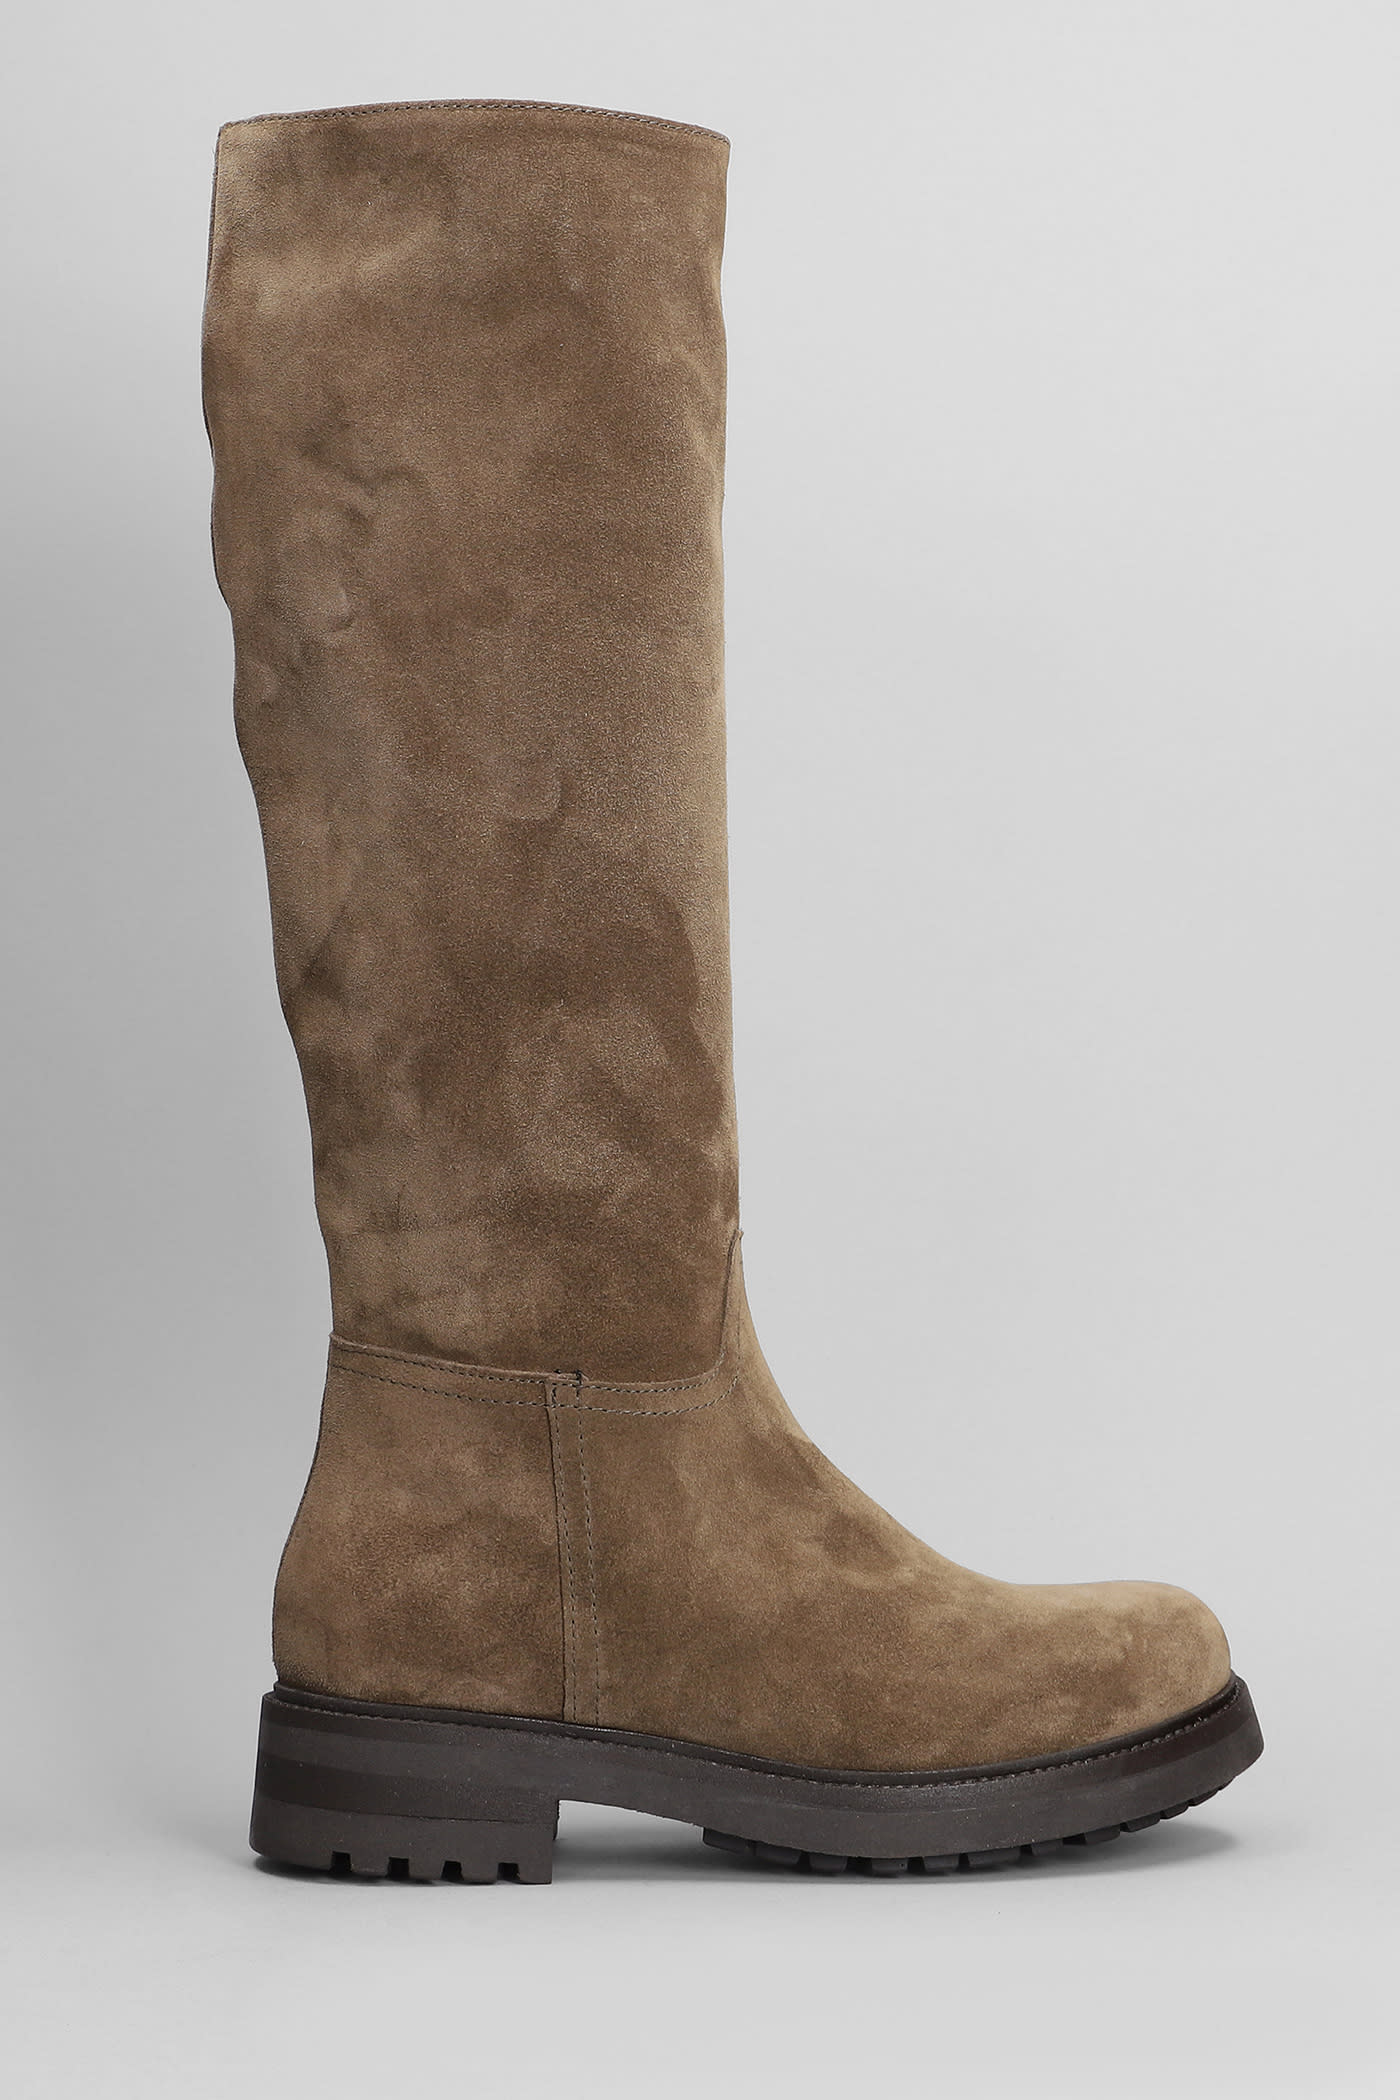 Low Heels Boots In Taupe Suede